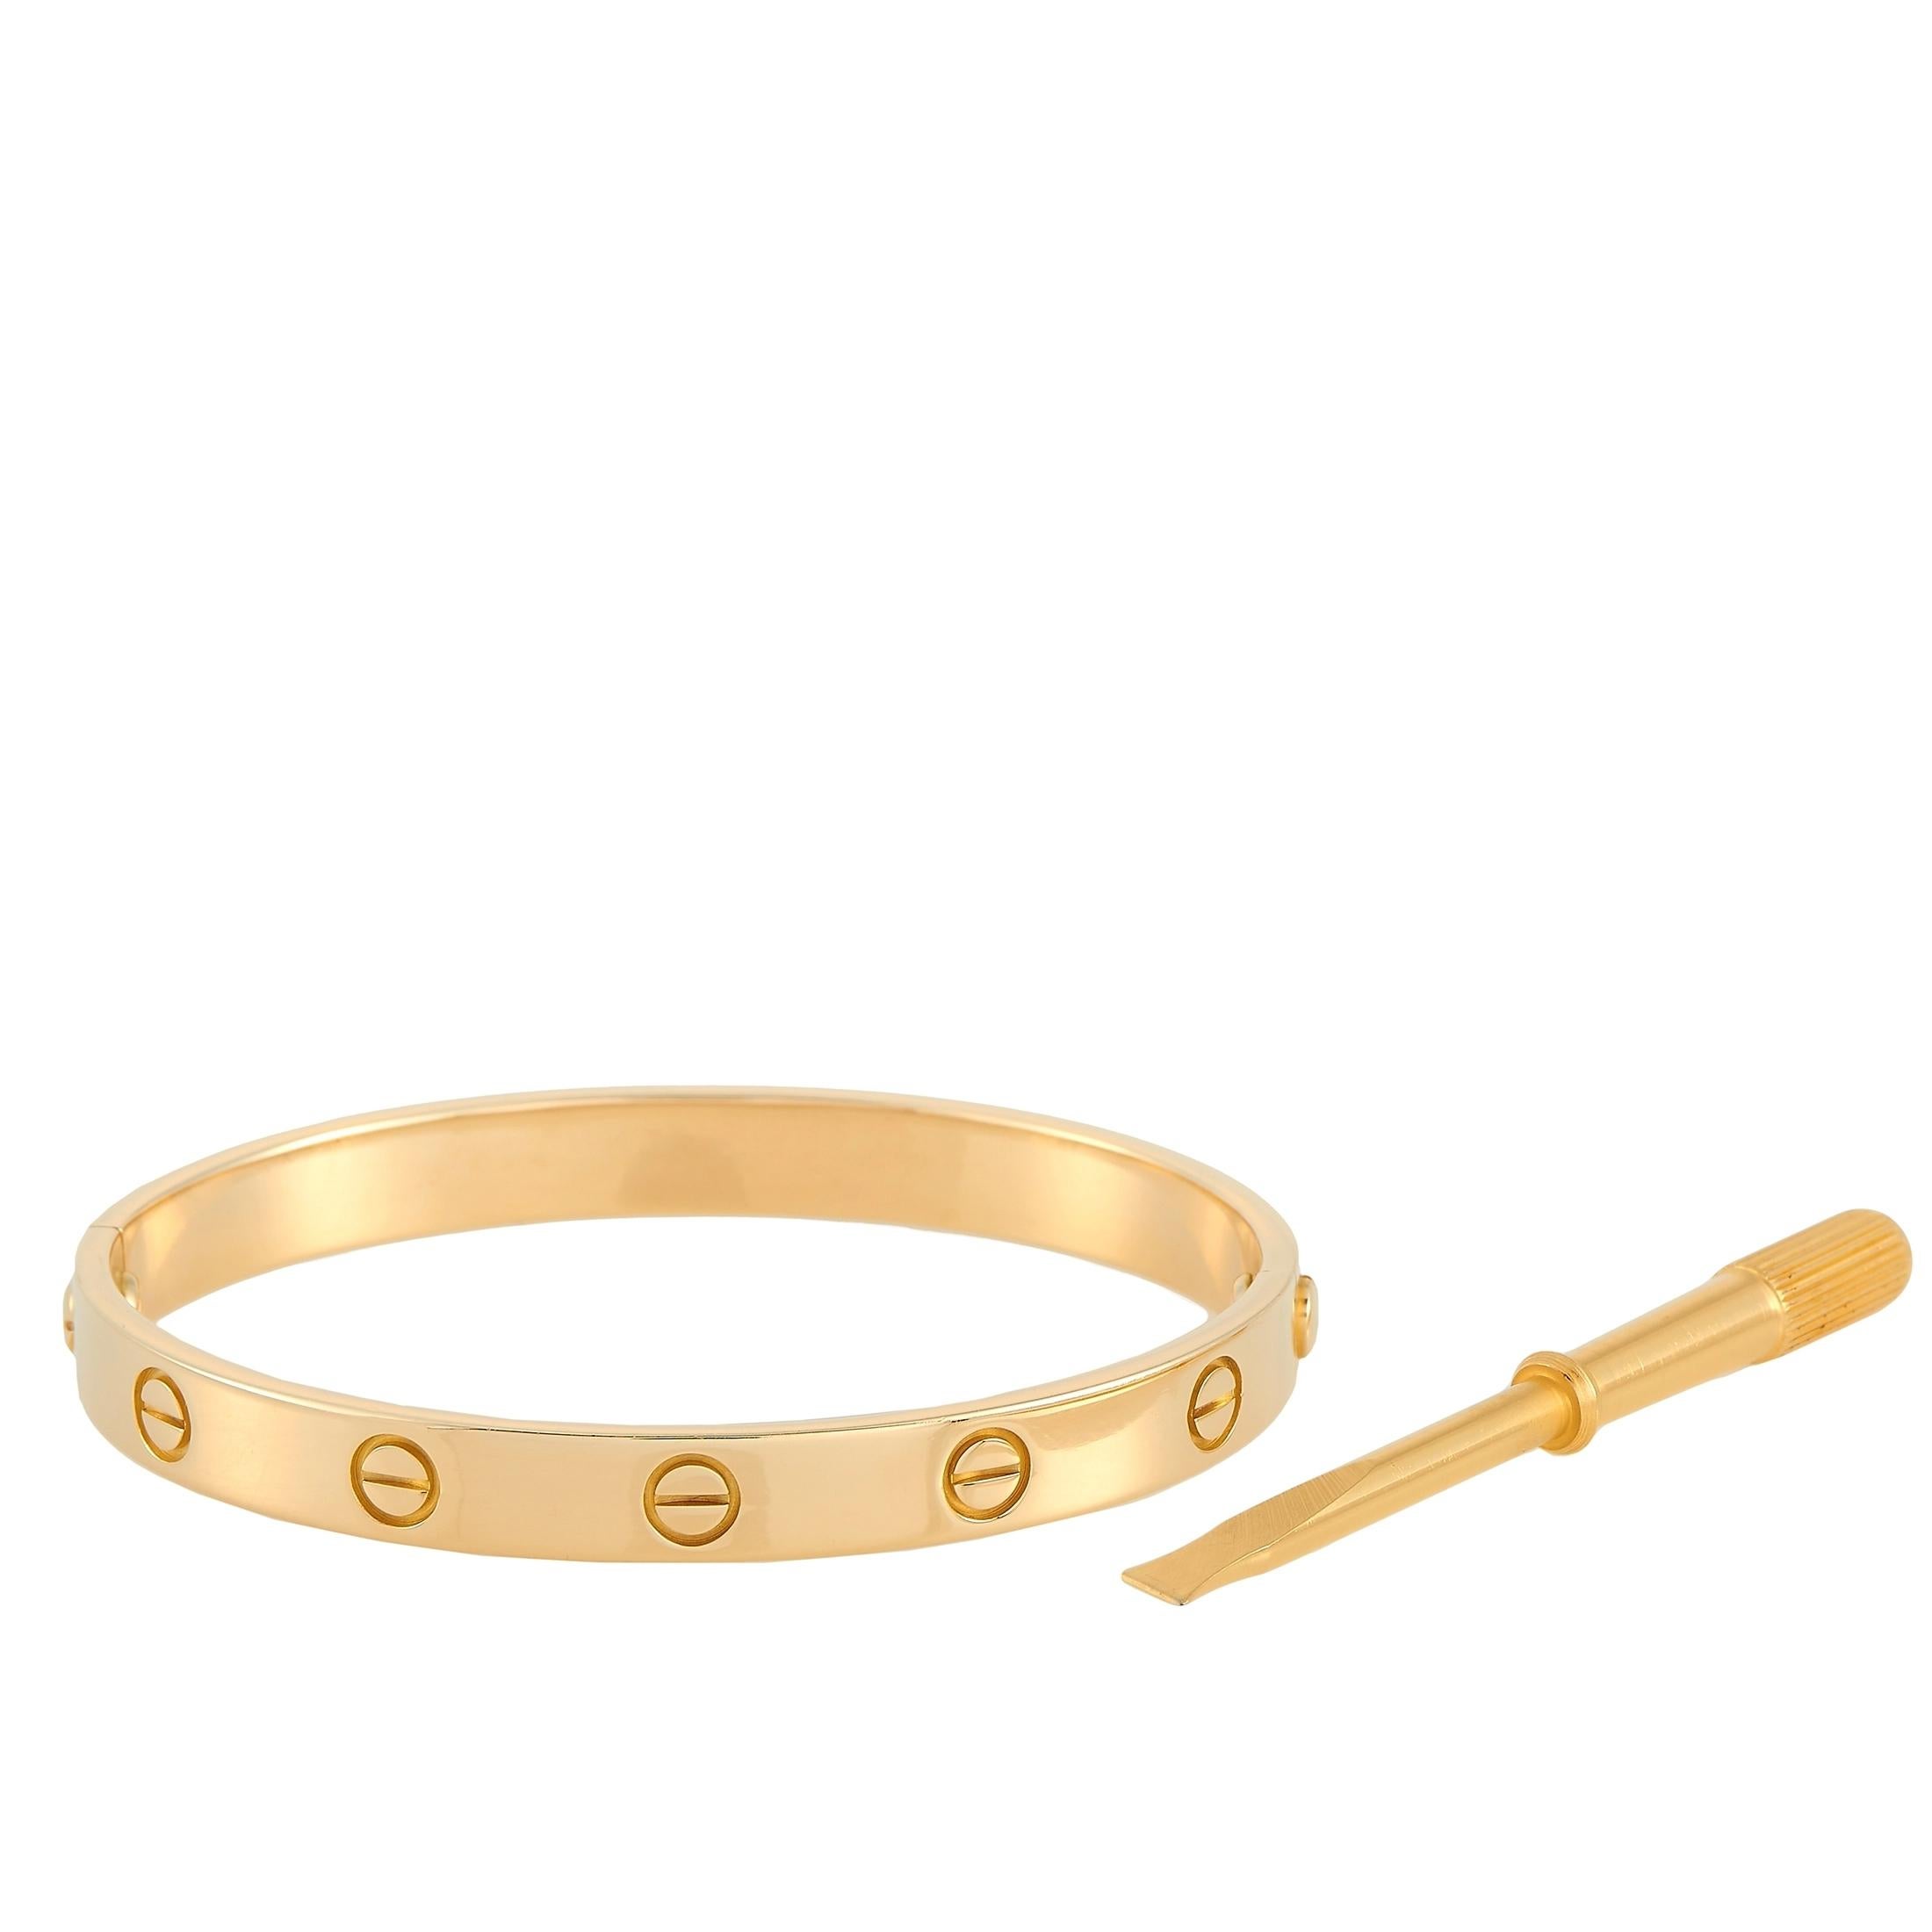 A classic design from Cartier that never goes out of style- the LOVE bracelet. This version is made of pure 18K yellow gold, and comes with a screwdriver for easy opening and closing. 